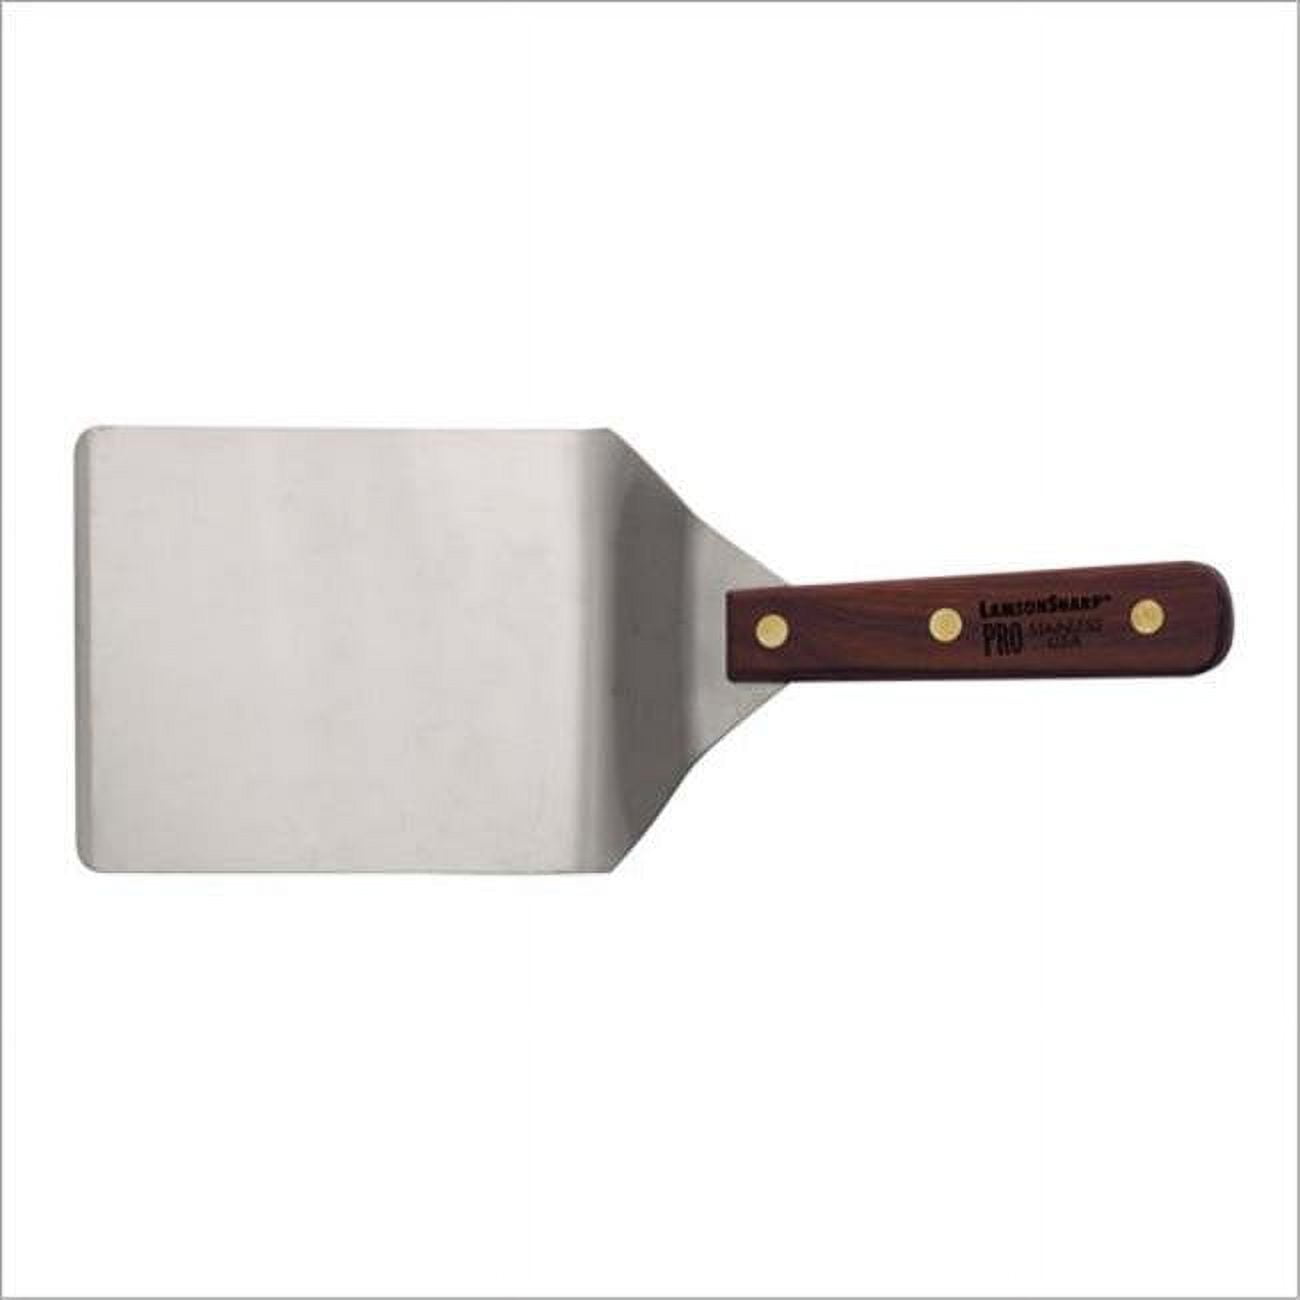 Lamson Stainless Steel and Walnut 3 x 6 inch Chef's Slotted Turner